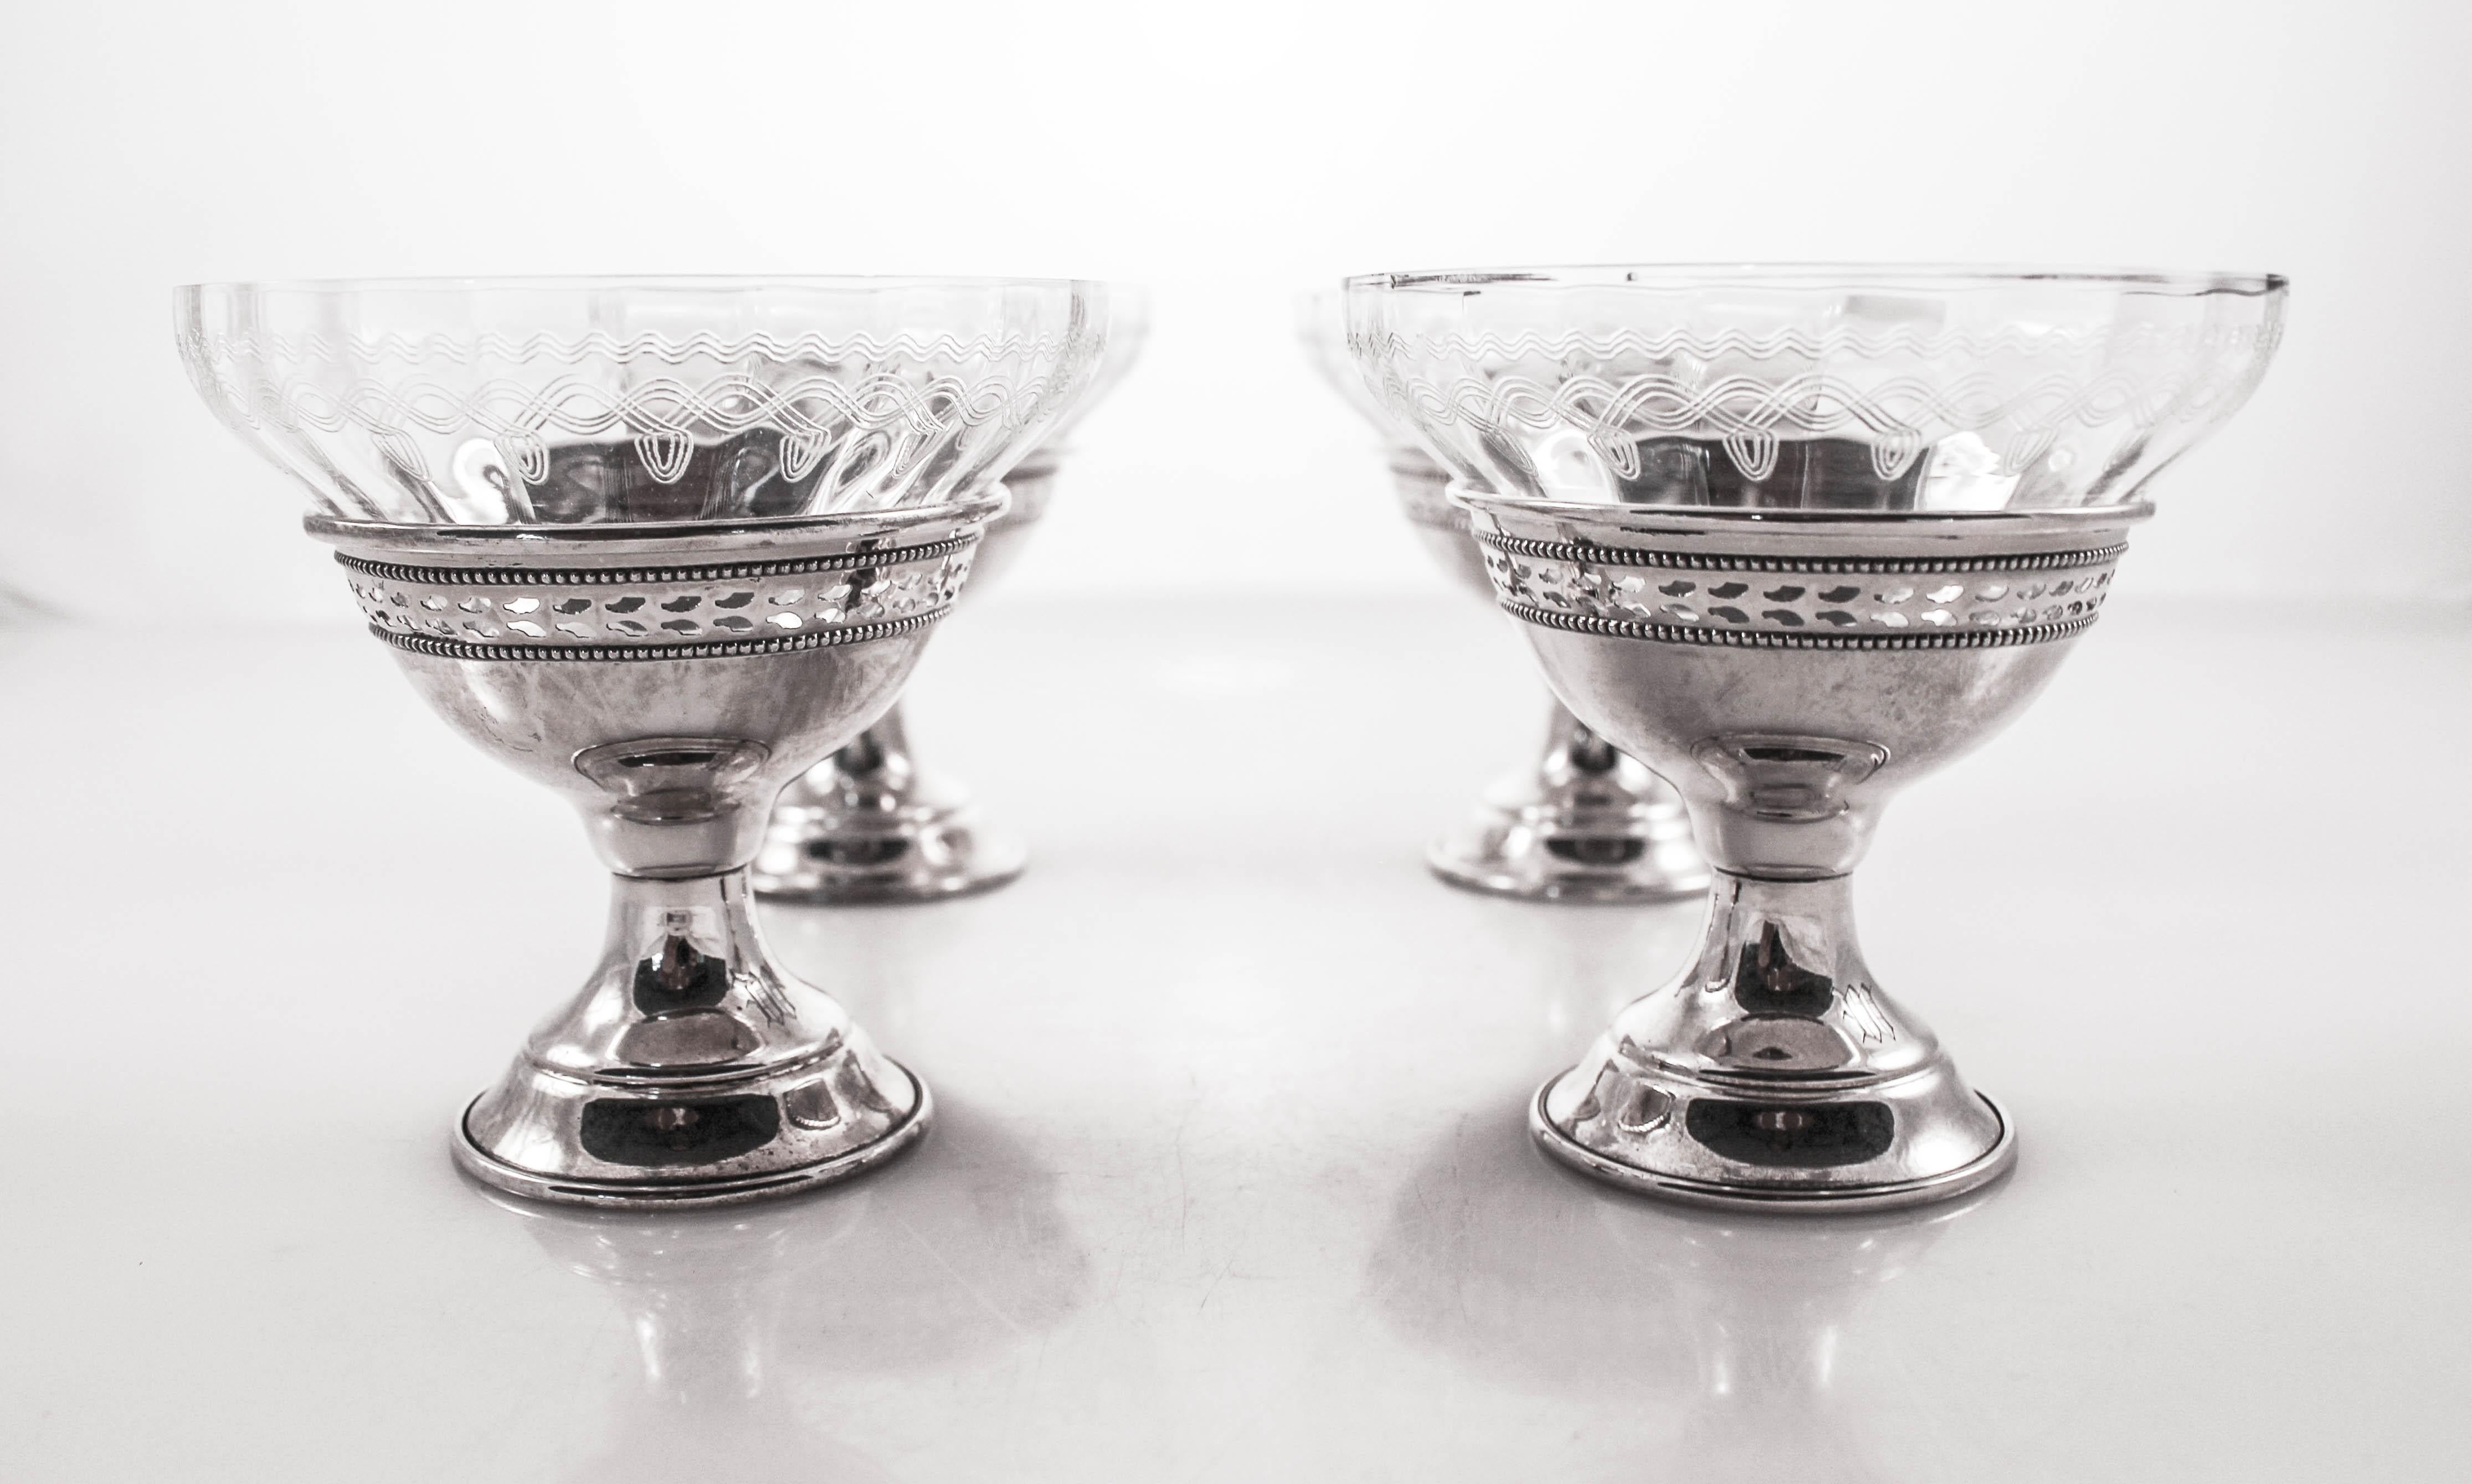 We are offering a set of four sterling silver and crystal dessert cups. Each sterling base is not weighted and has a cutout motif going around the top. Each crystal insert has an acid etched design and fits perfectly into the center. They are in